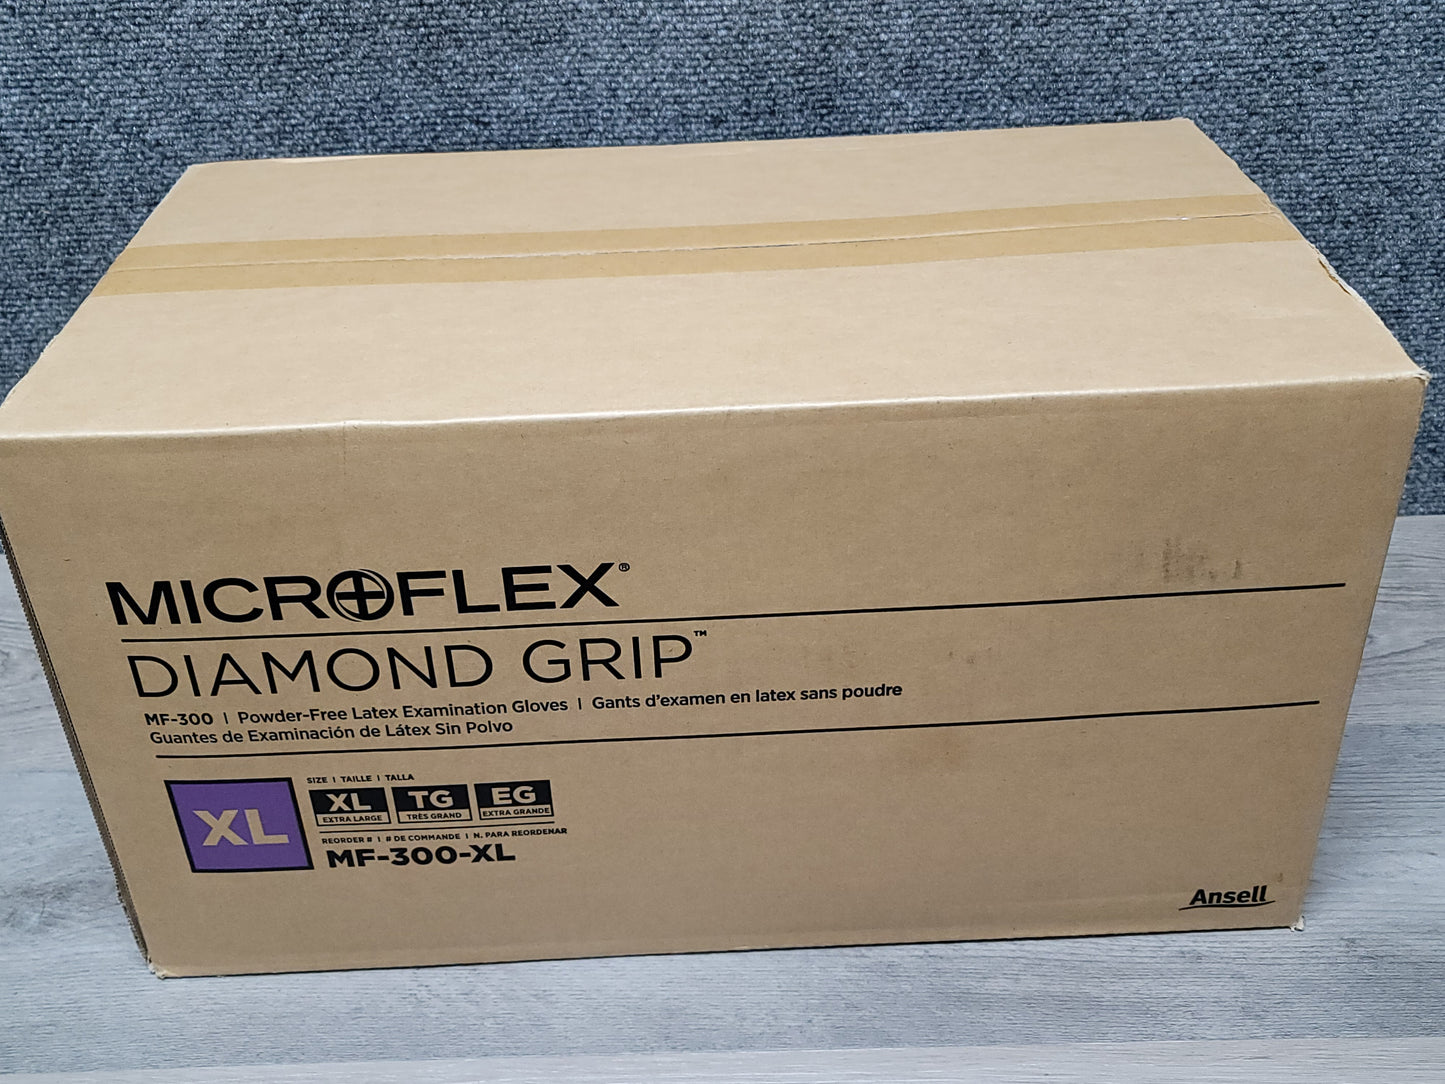 MIcroflex Diamond  Grip XL 10 boxes of 100 Count  Latex Gloves